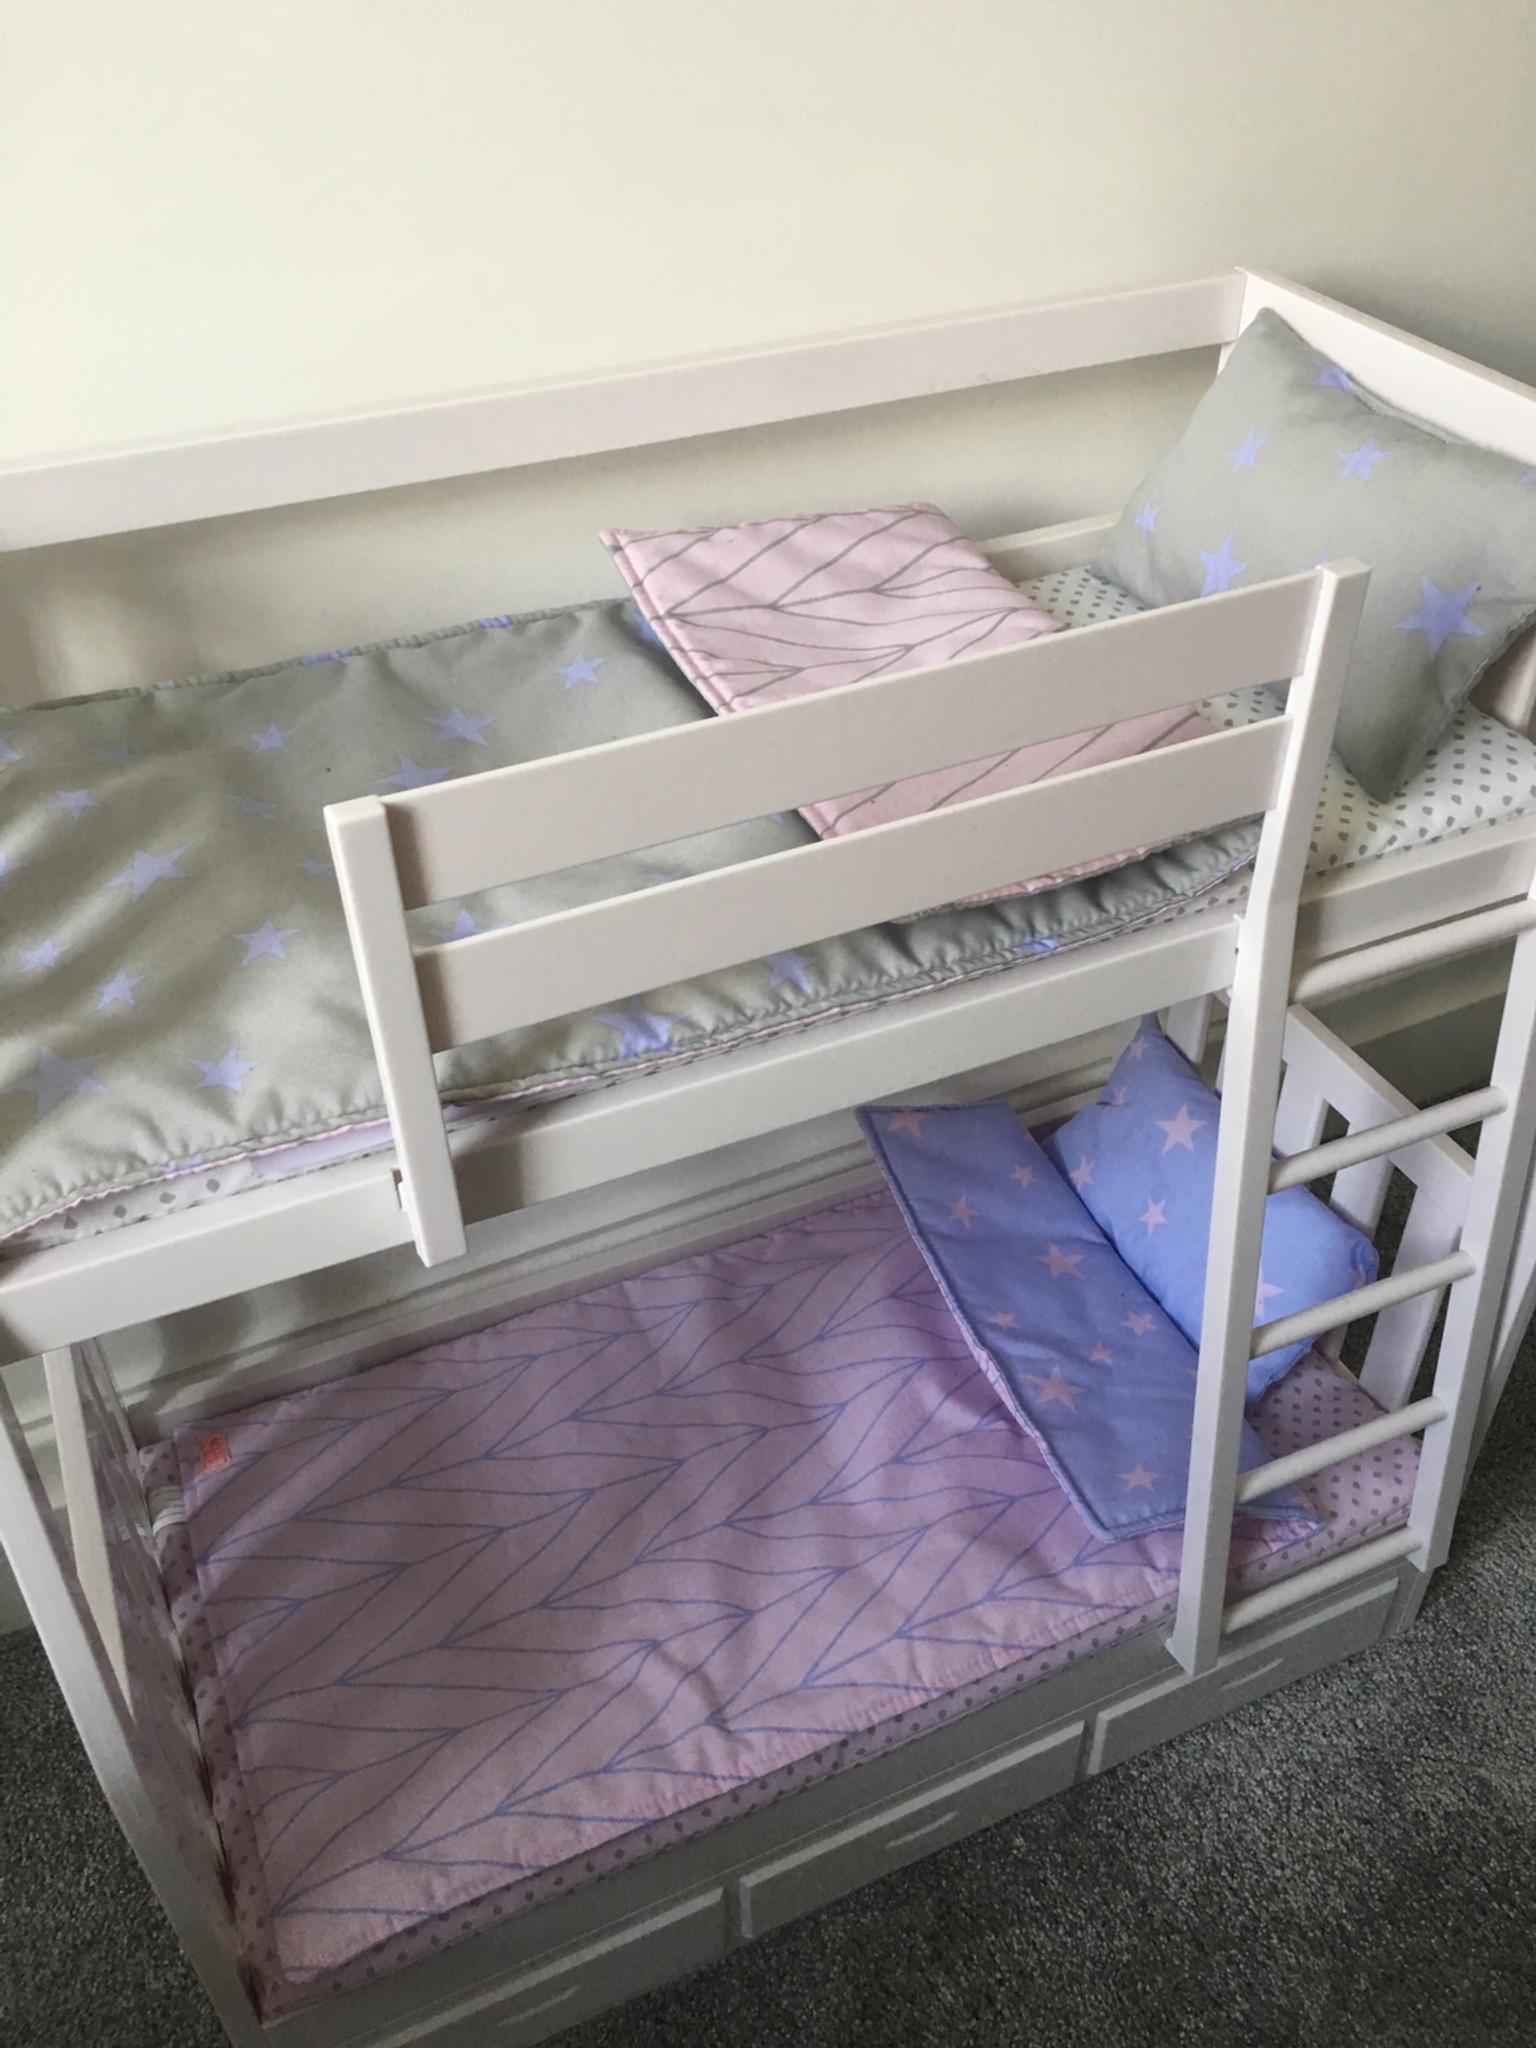 Our Generation Dream Bunk Beds In St, Our Generation Dream Bunk Beds Argos